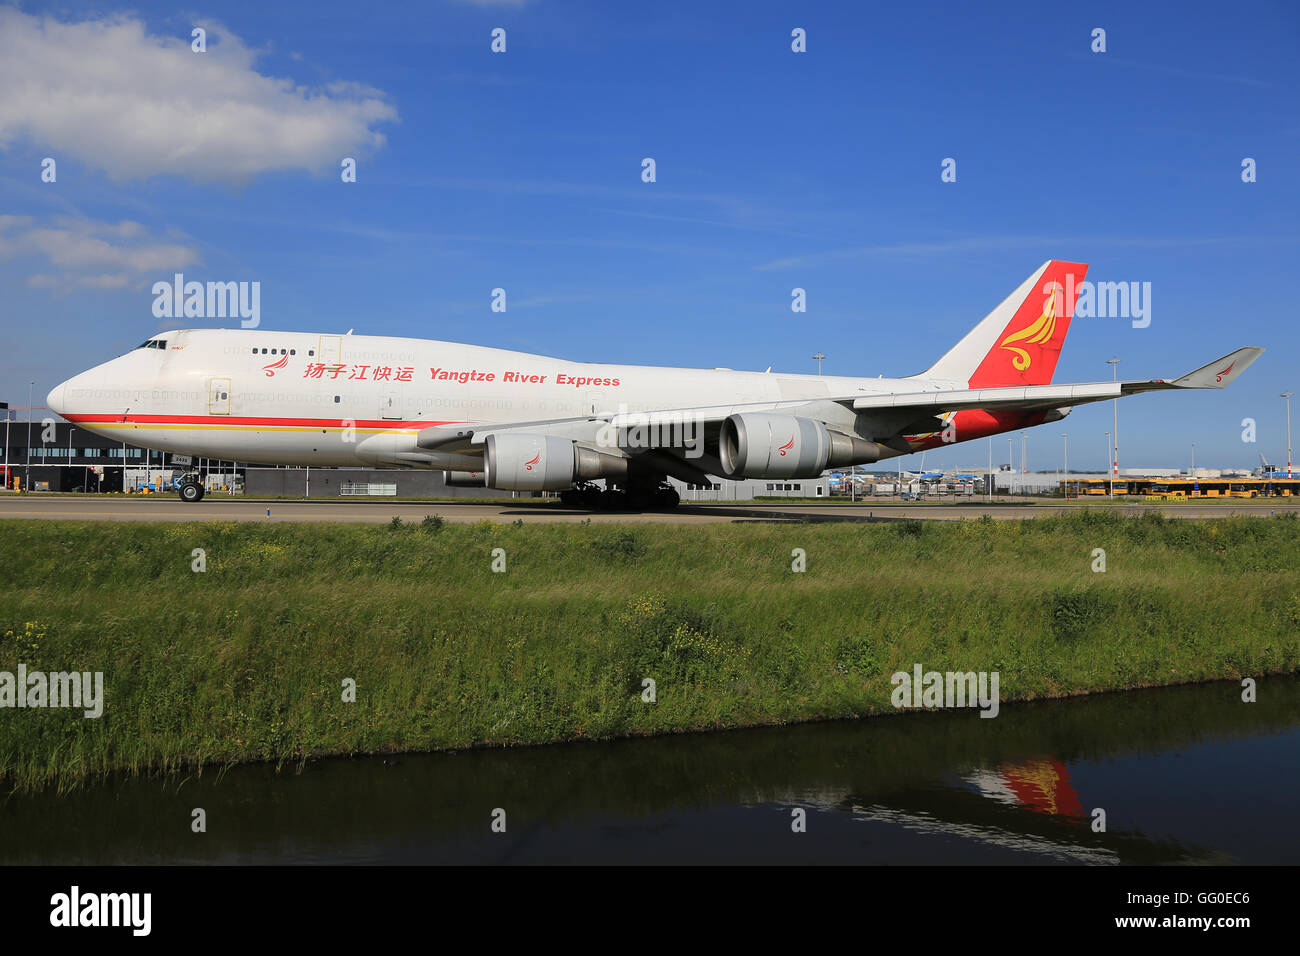 Amsterdam/Netherland August 5, 2015:Boeing 747 from Jangtze River Express at AmsterdamAirport. Stock Photo